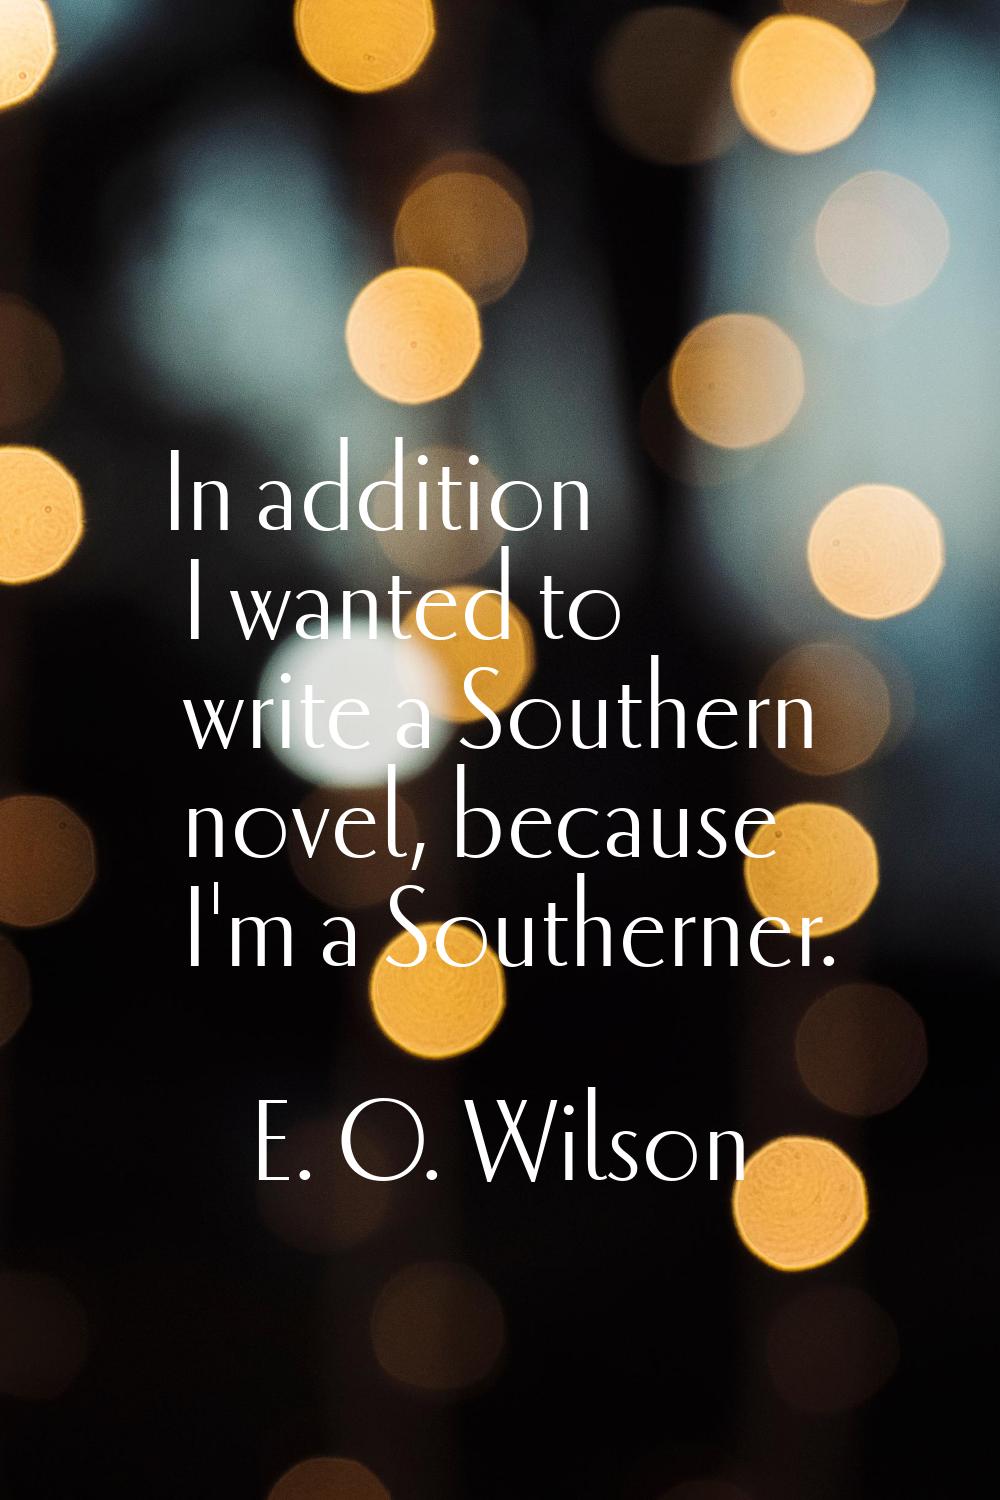 In addition I wanted to write a Southern novel, because I'm a Southerner.